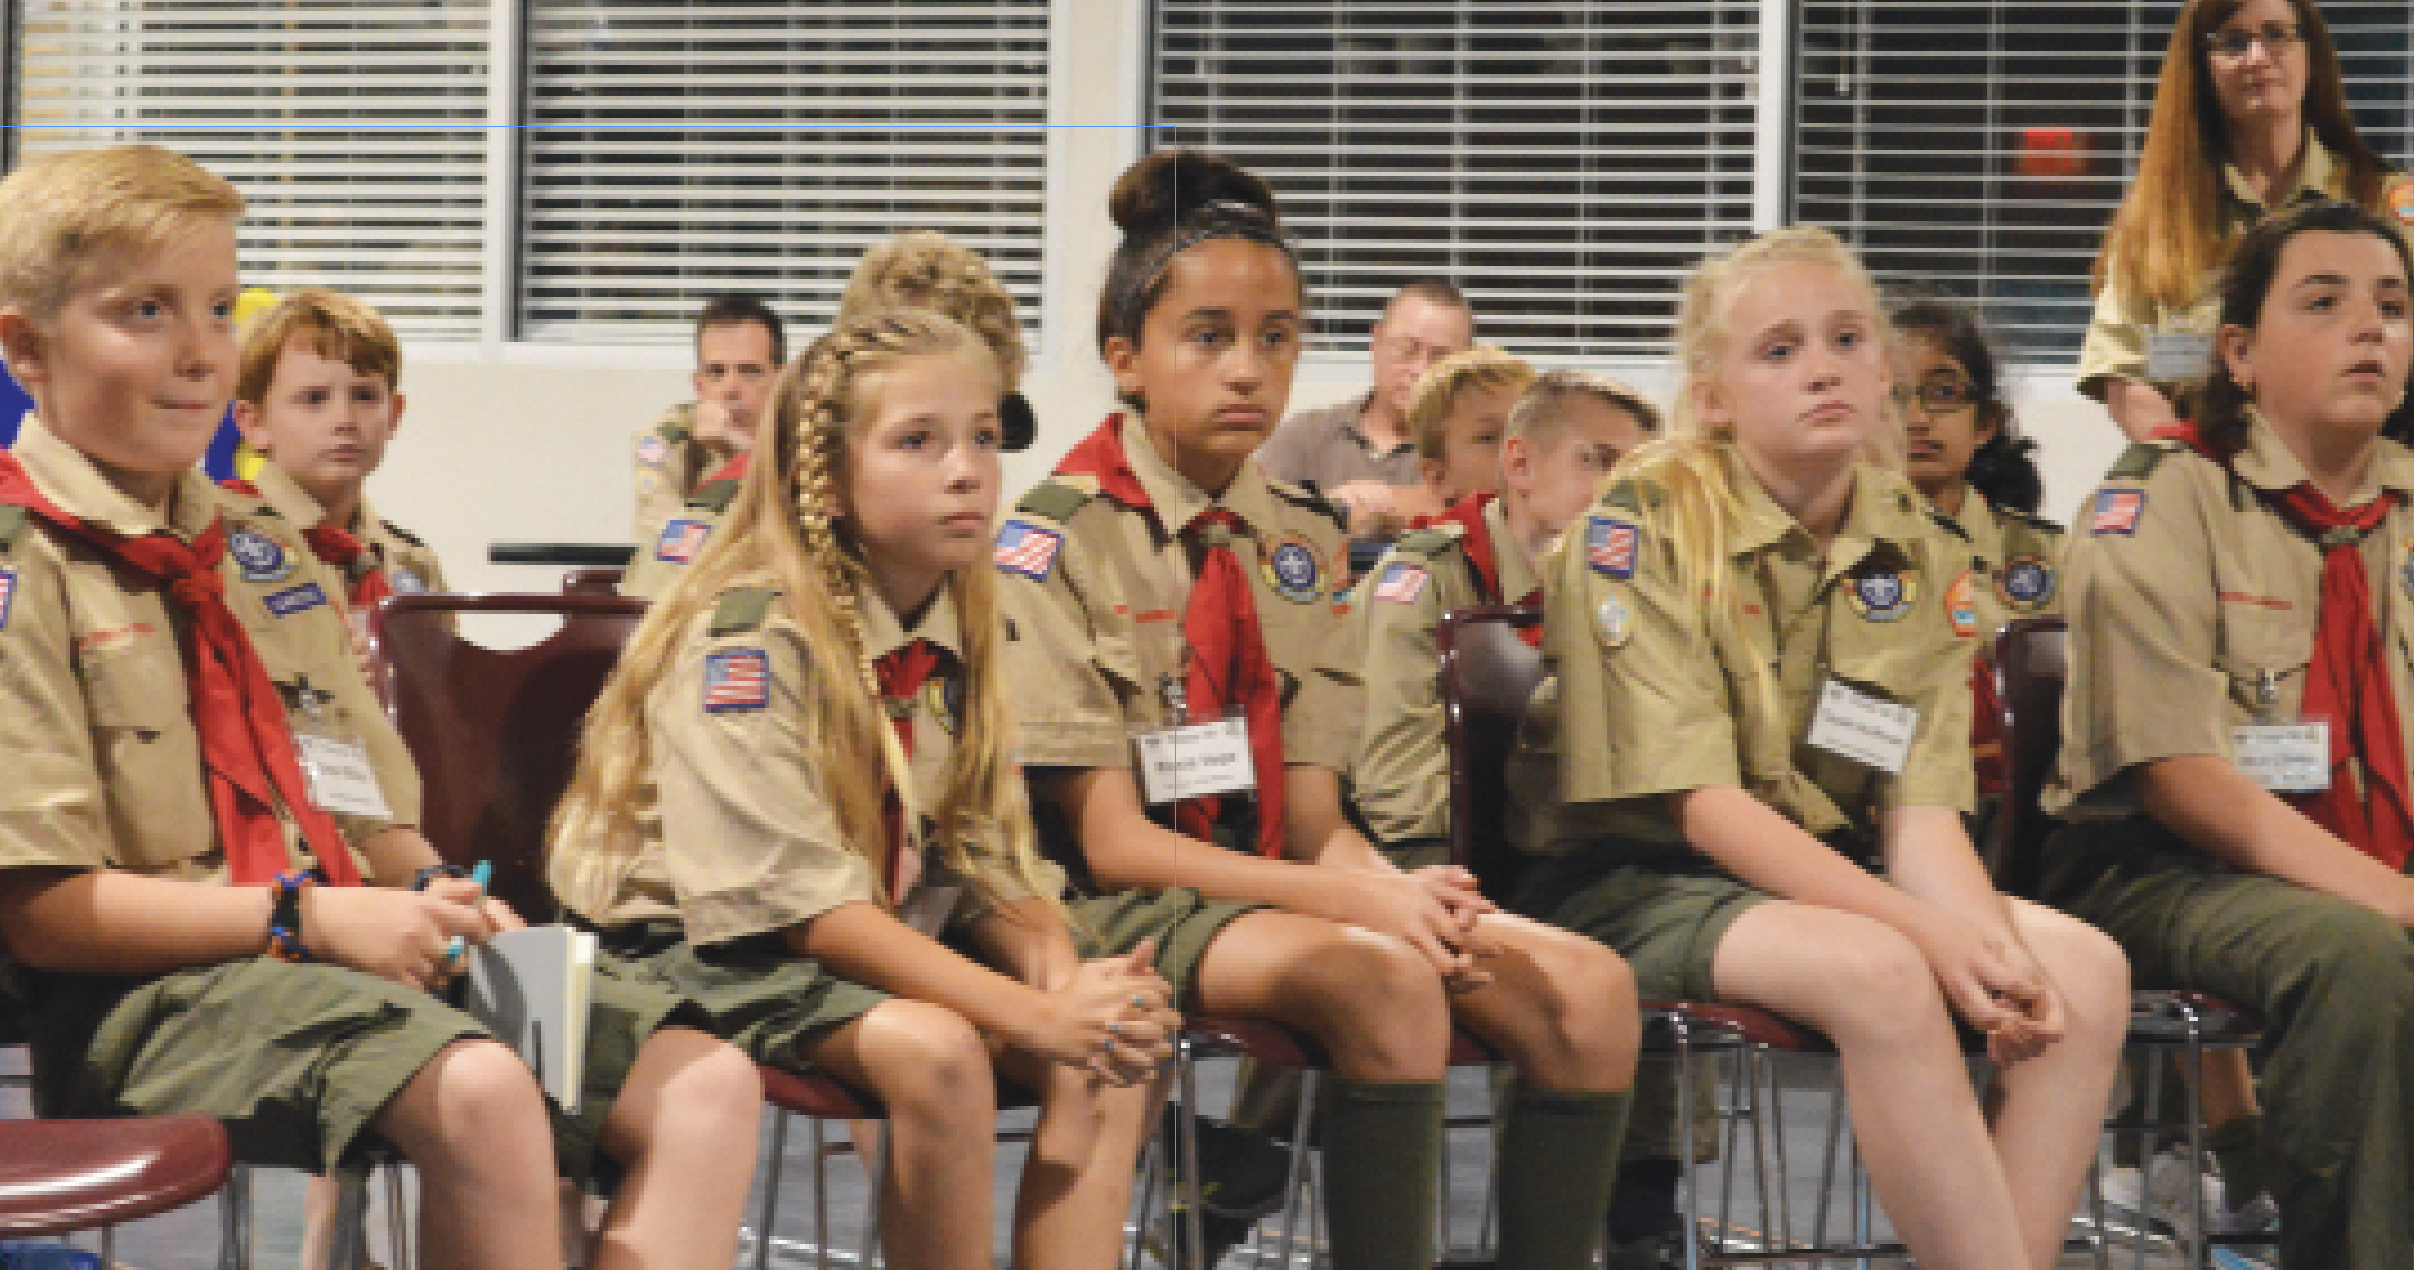 Three Wesley Chapel Girls The First To Join New Boy Scouts Program — Neighborhood News 5586